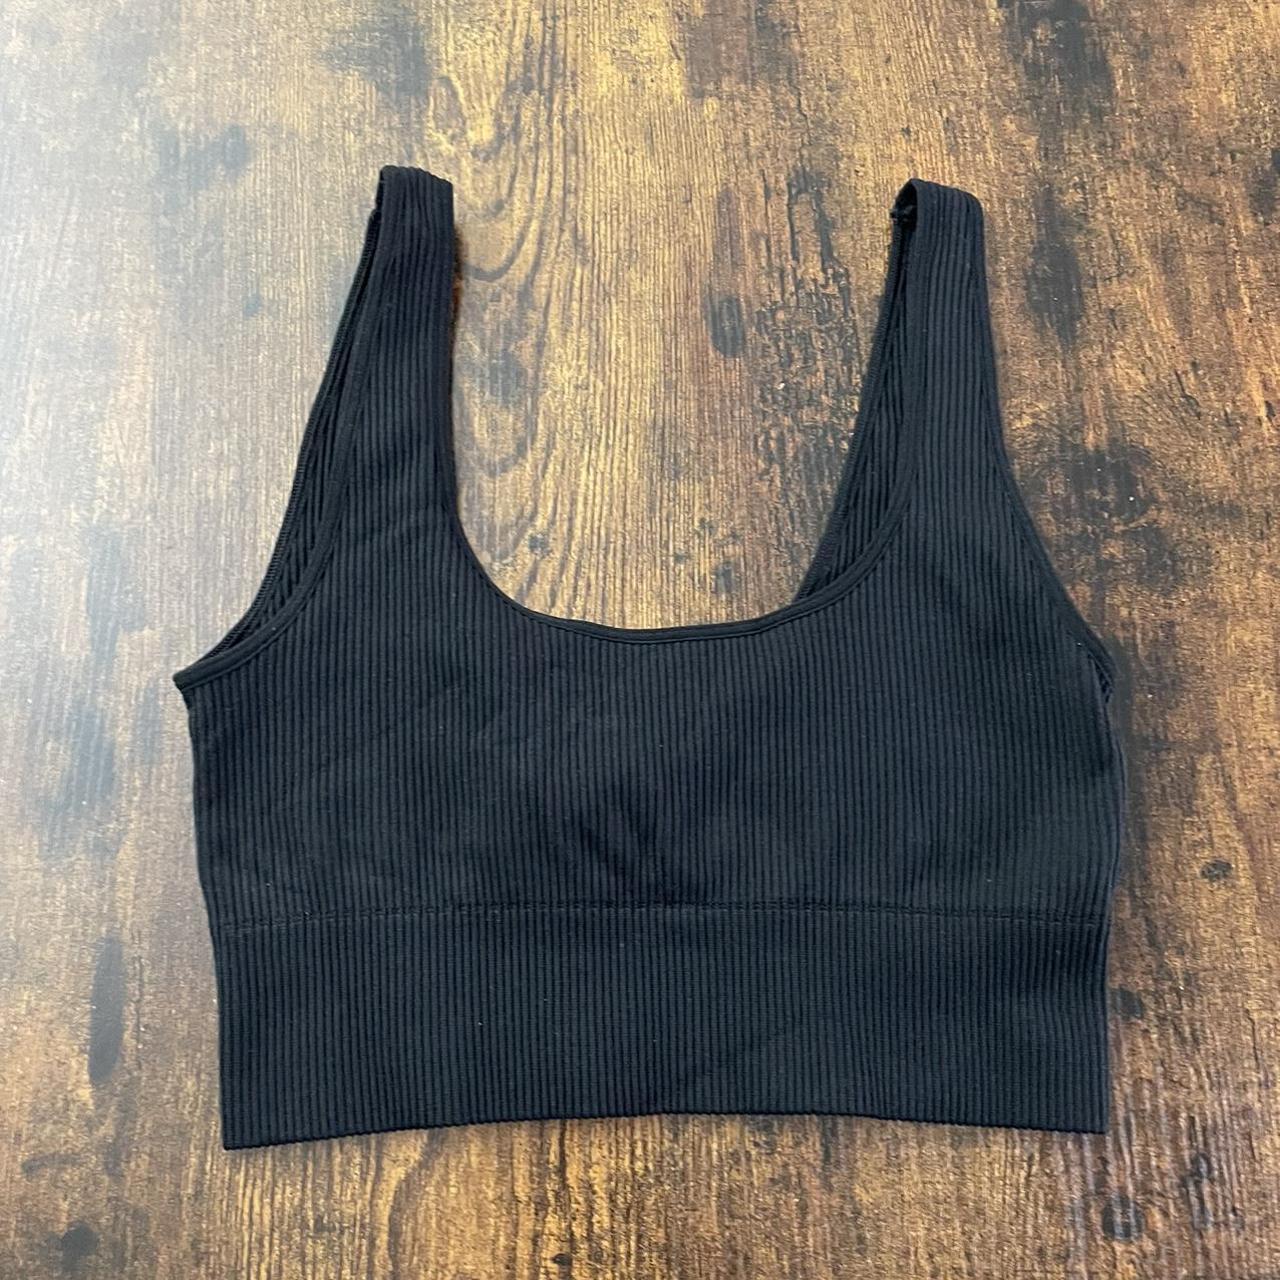 GAPBODY Seamless Ribbed Bralette, New without tags